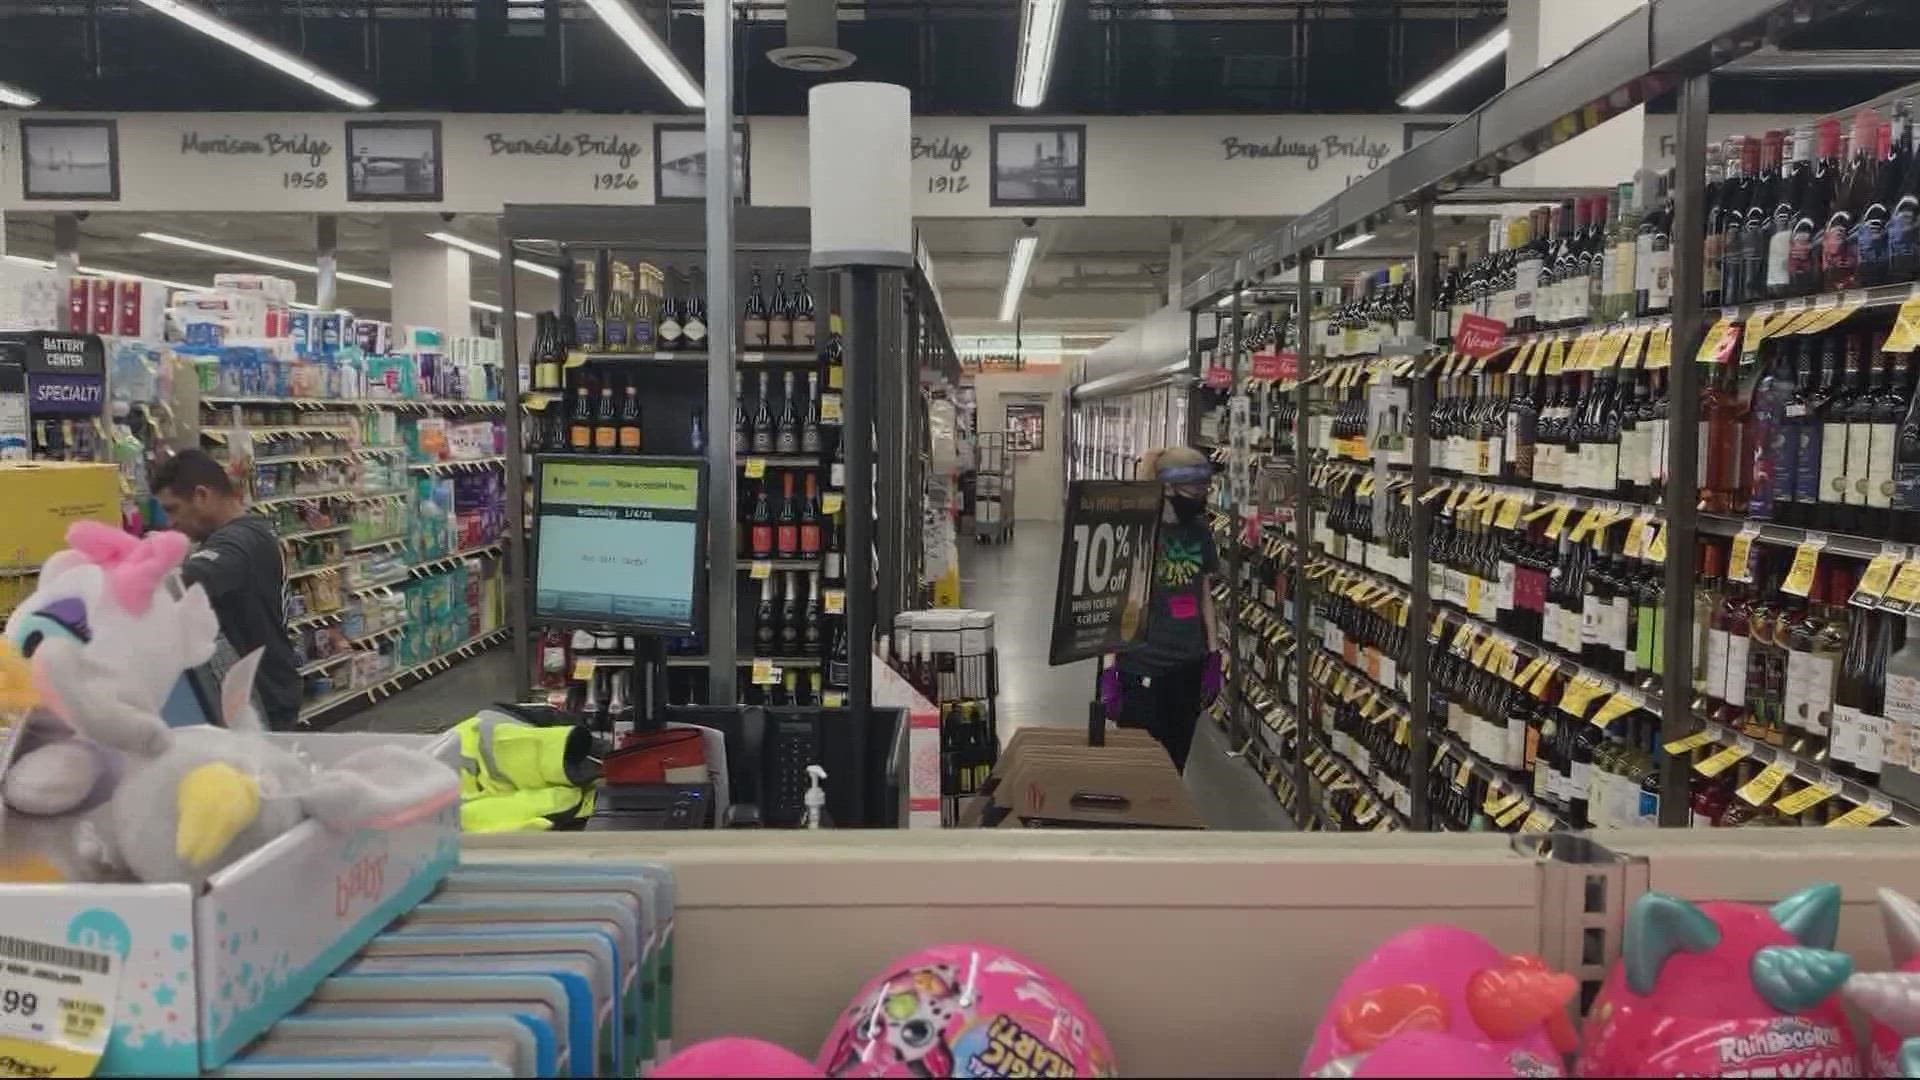 In an attempt to curb shoplifting, the stores launched a secured area within the store with the most "lifted" items — away from the exit doors